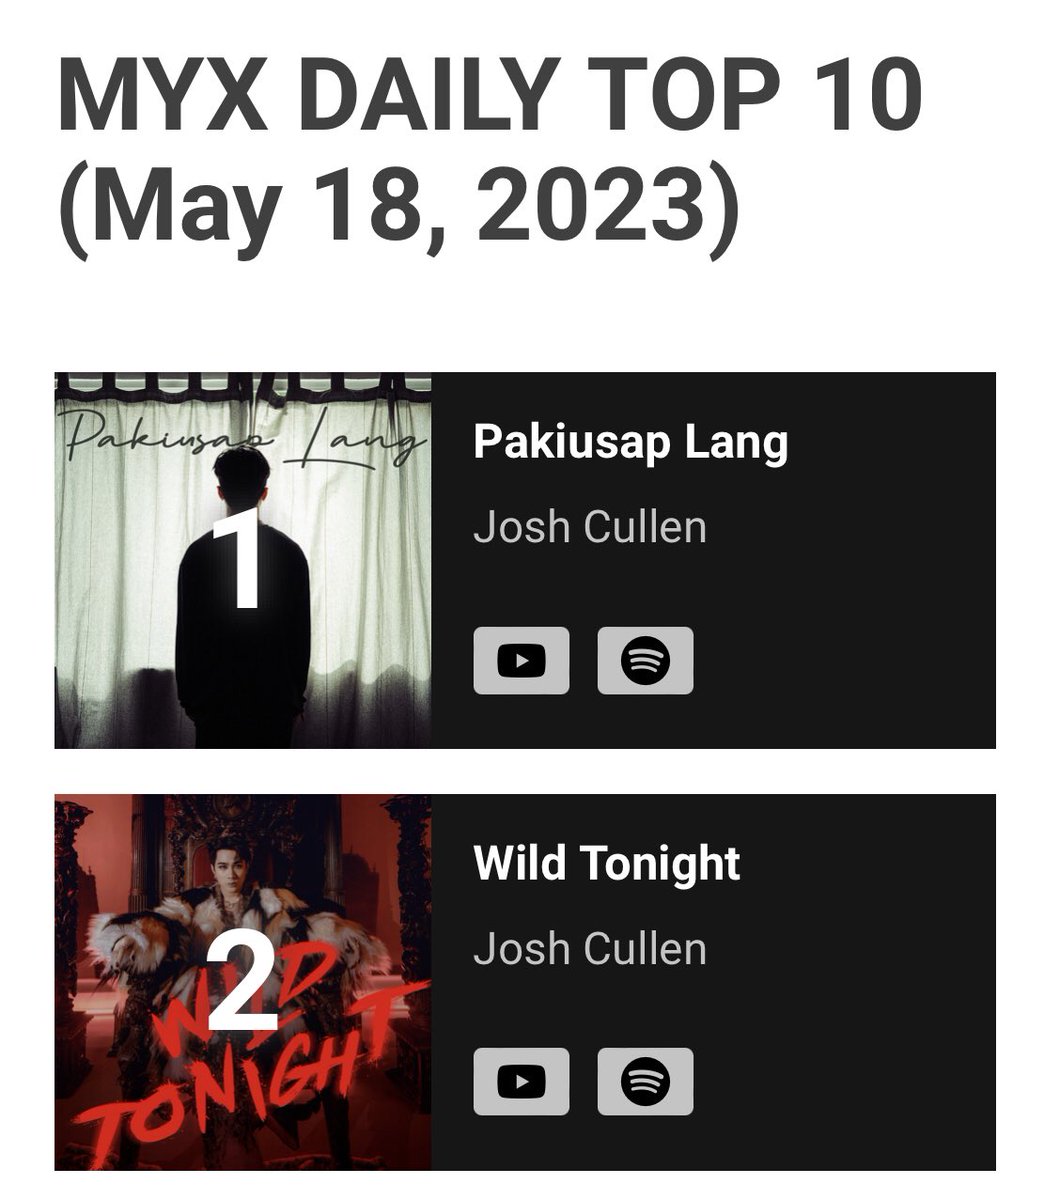 MYX UPDATE:
MYX Daily Top 10 (May 18) 

#JC_PakiusapLang is staying on top today while #WILDTONIGHT will remain at No. 2. 

Keep these songs in the top spots for as long as we can by voting on myx.global/vote/! 

Have a great morning, folks! 🥞

@JoshCullen_s #JOSHCULLEN